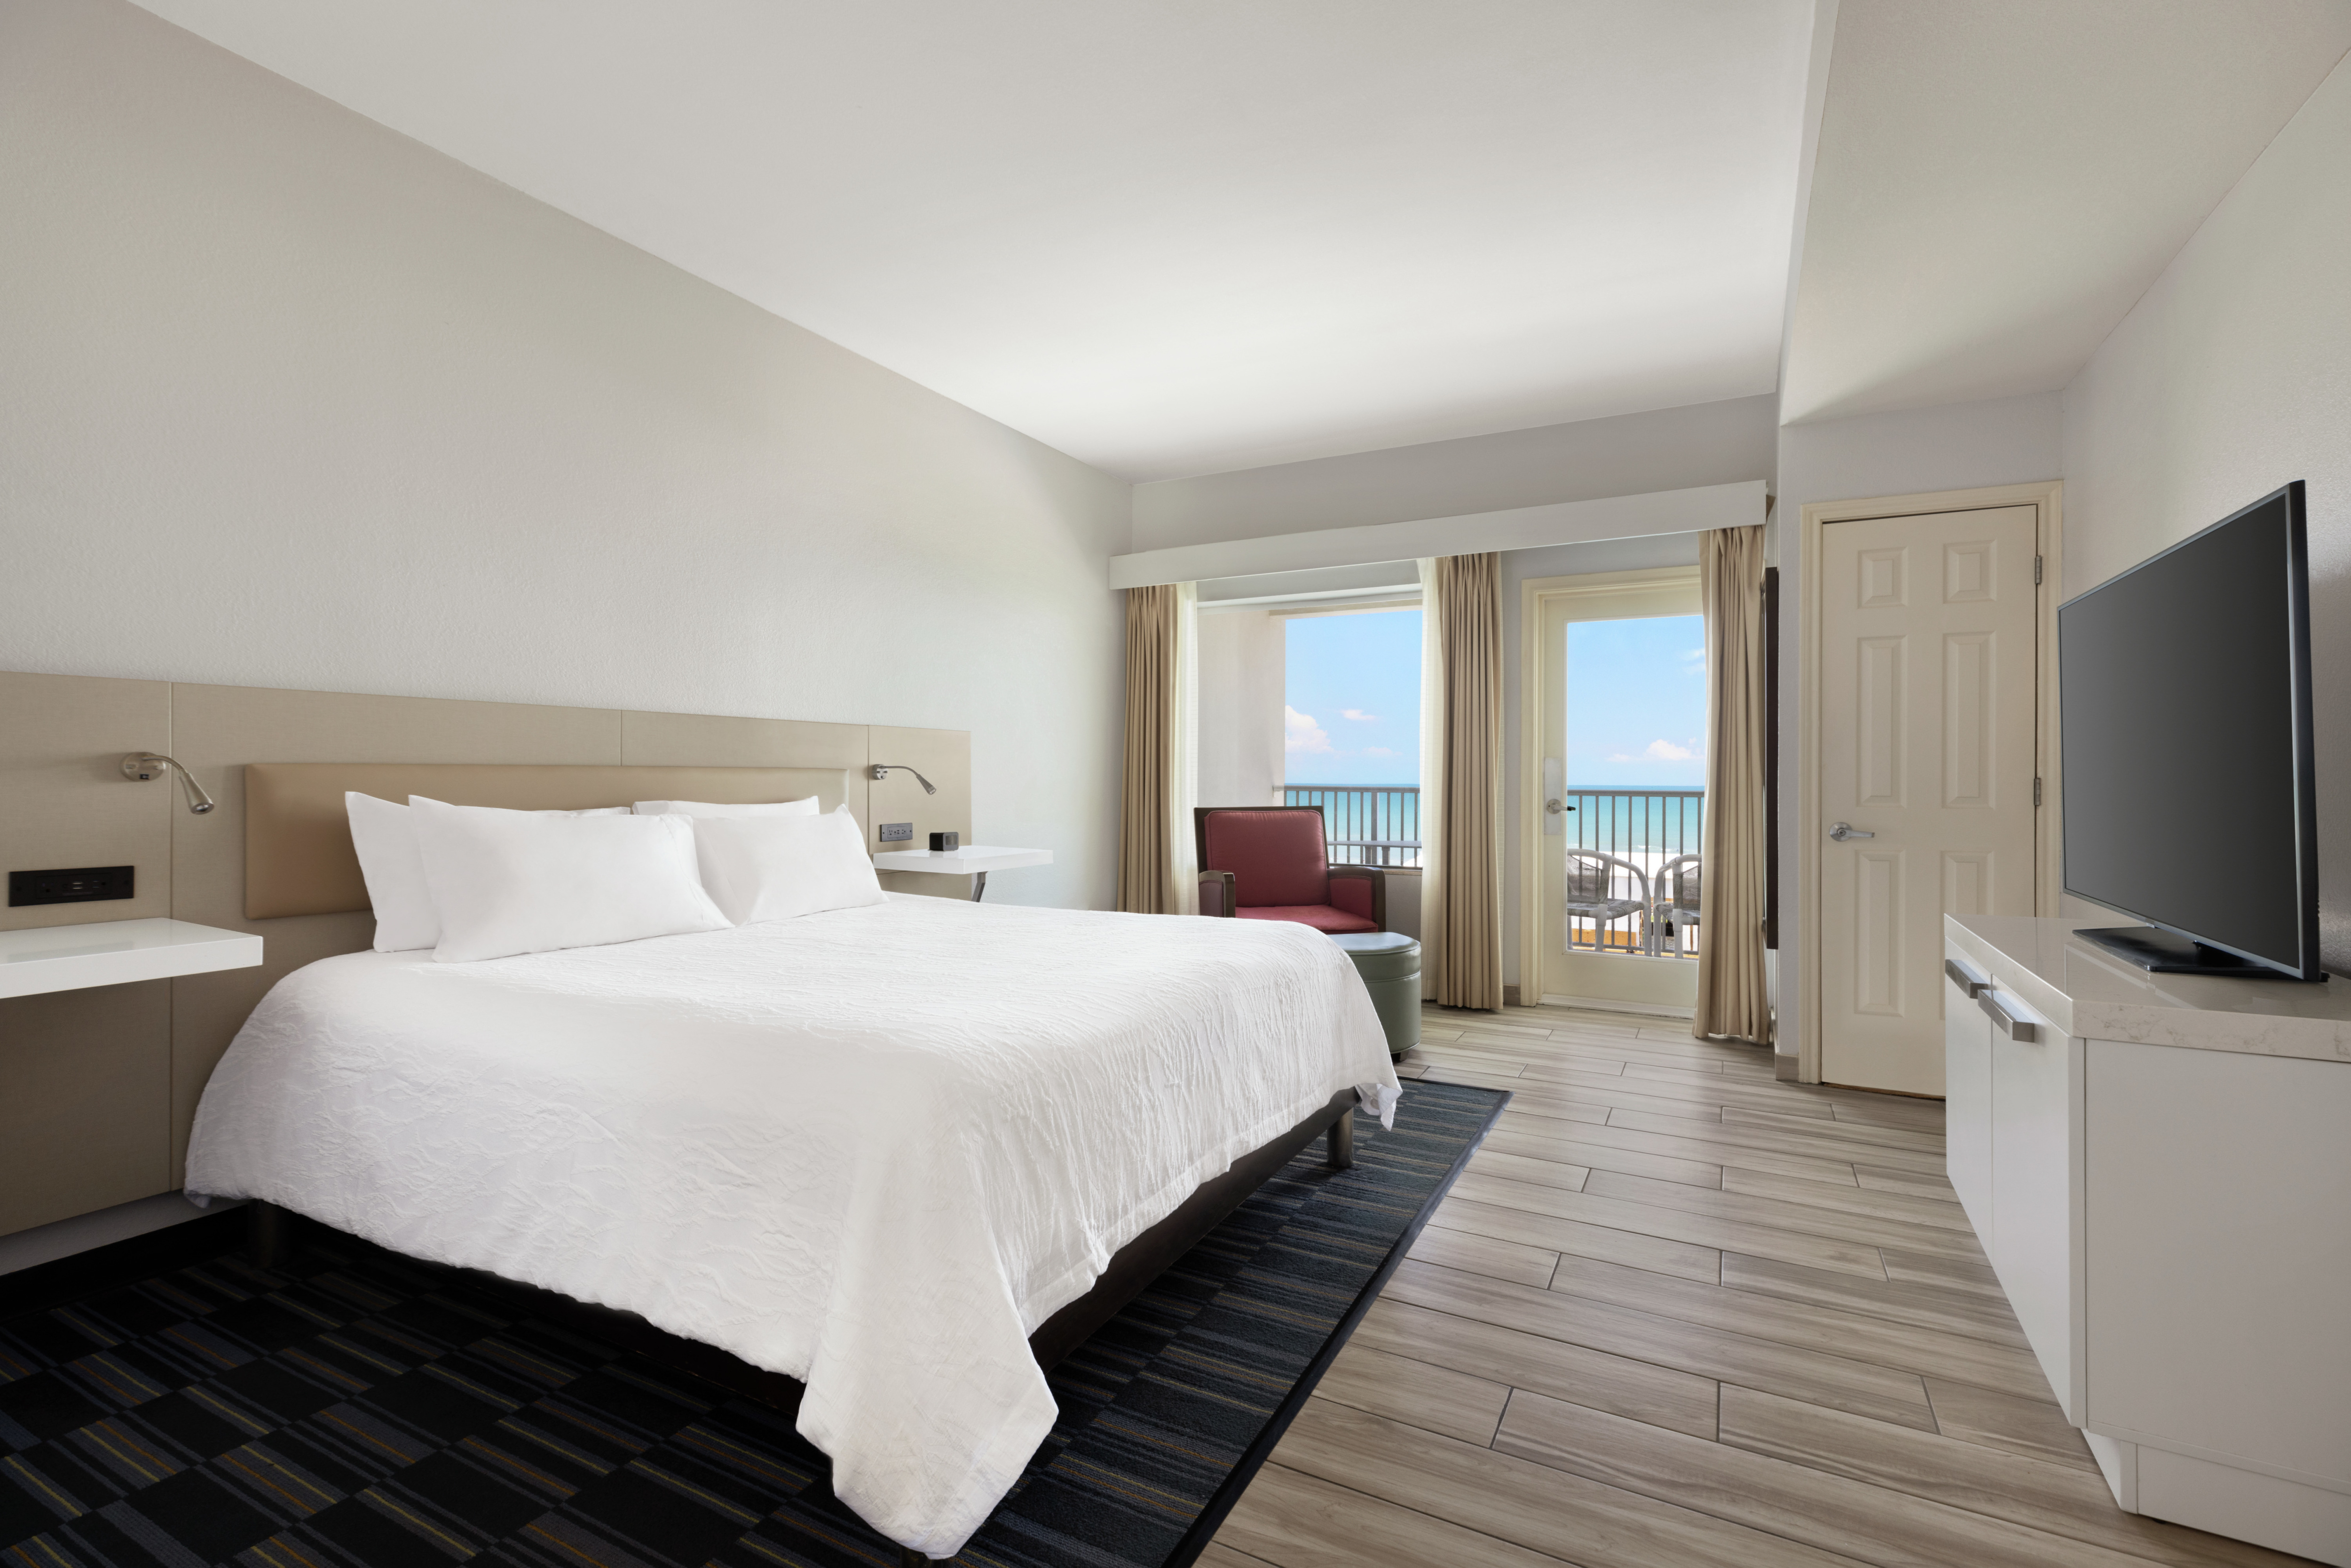 Spacious guest room featuring comfortable king bed, TV, and stunning ocean view.